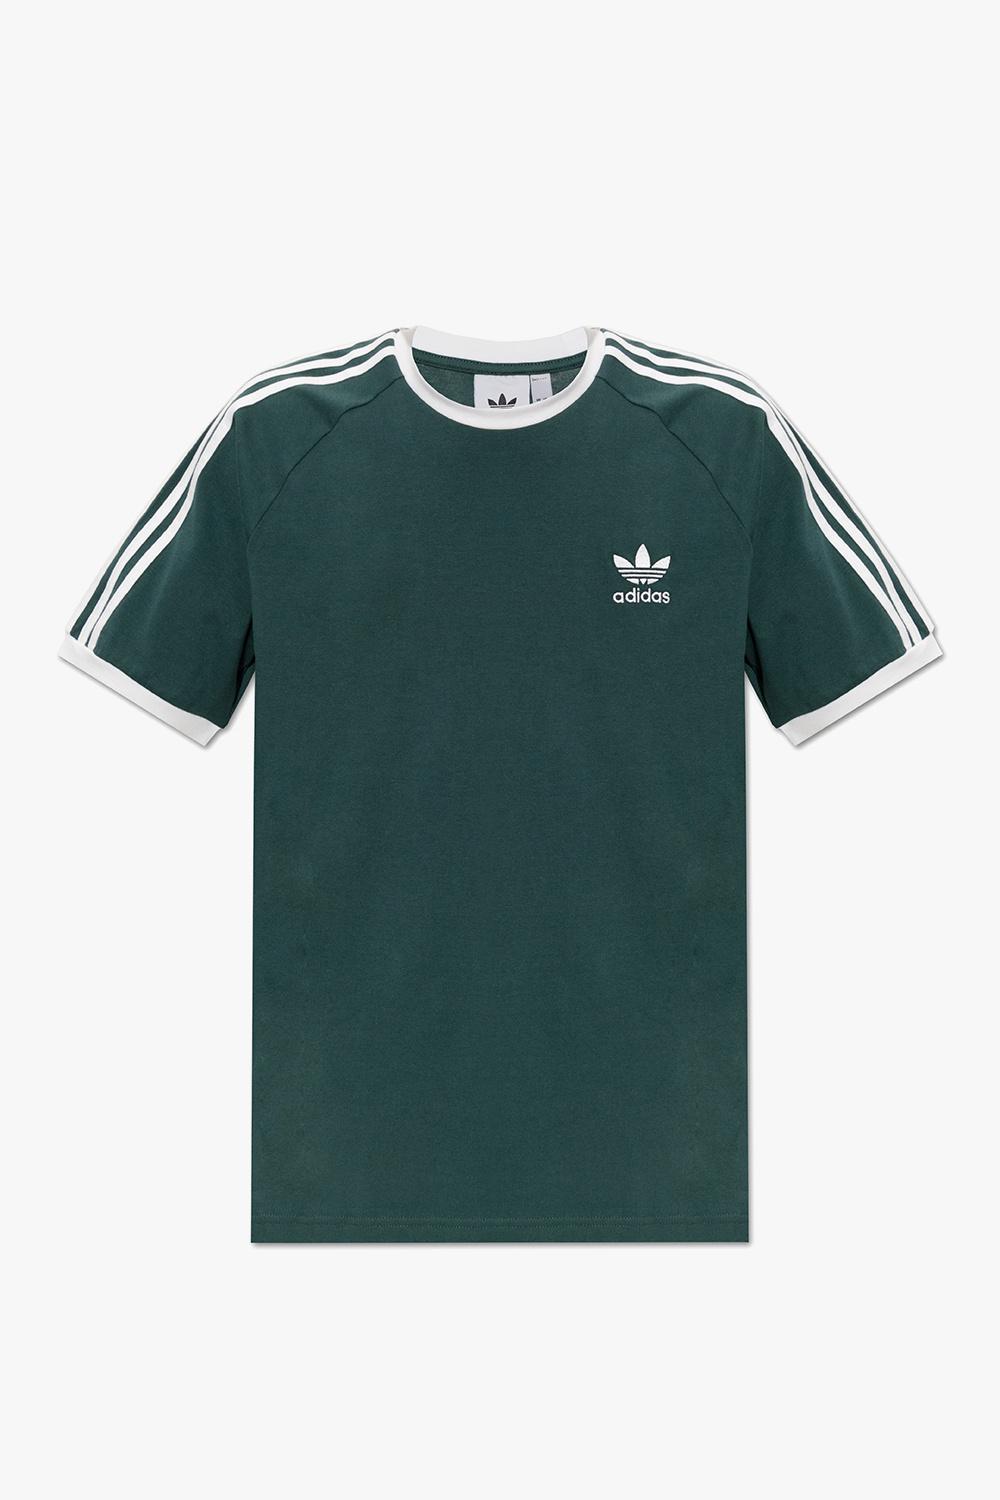 adidas Originals Cotton T-shirt With Logo in Green for Men | Lyst